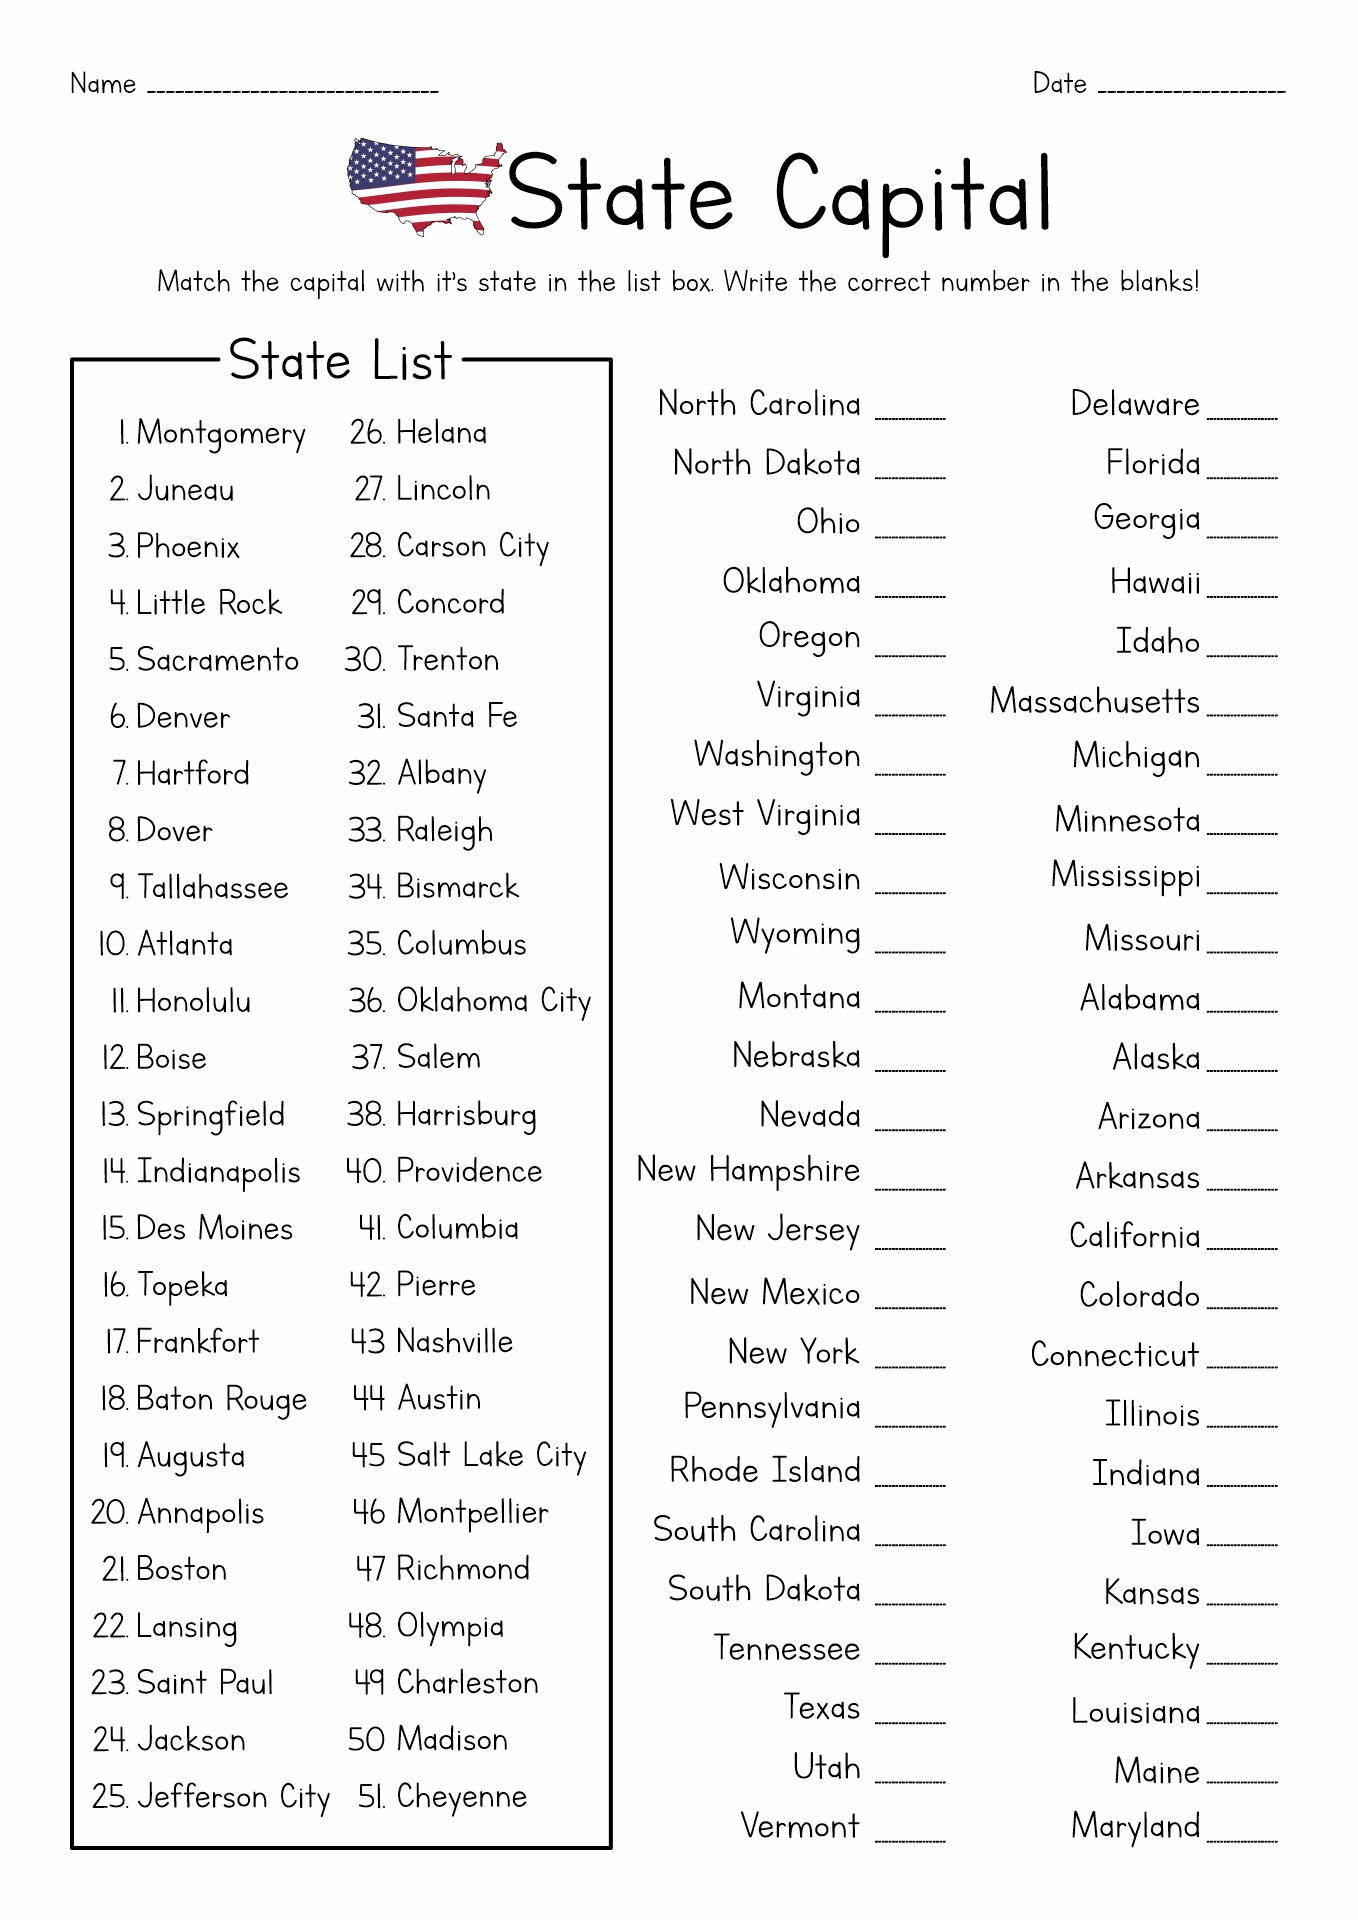 list-of-state-capitals-printable